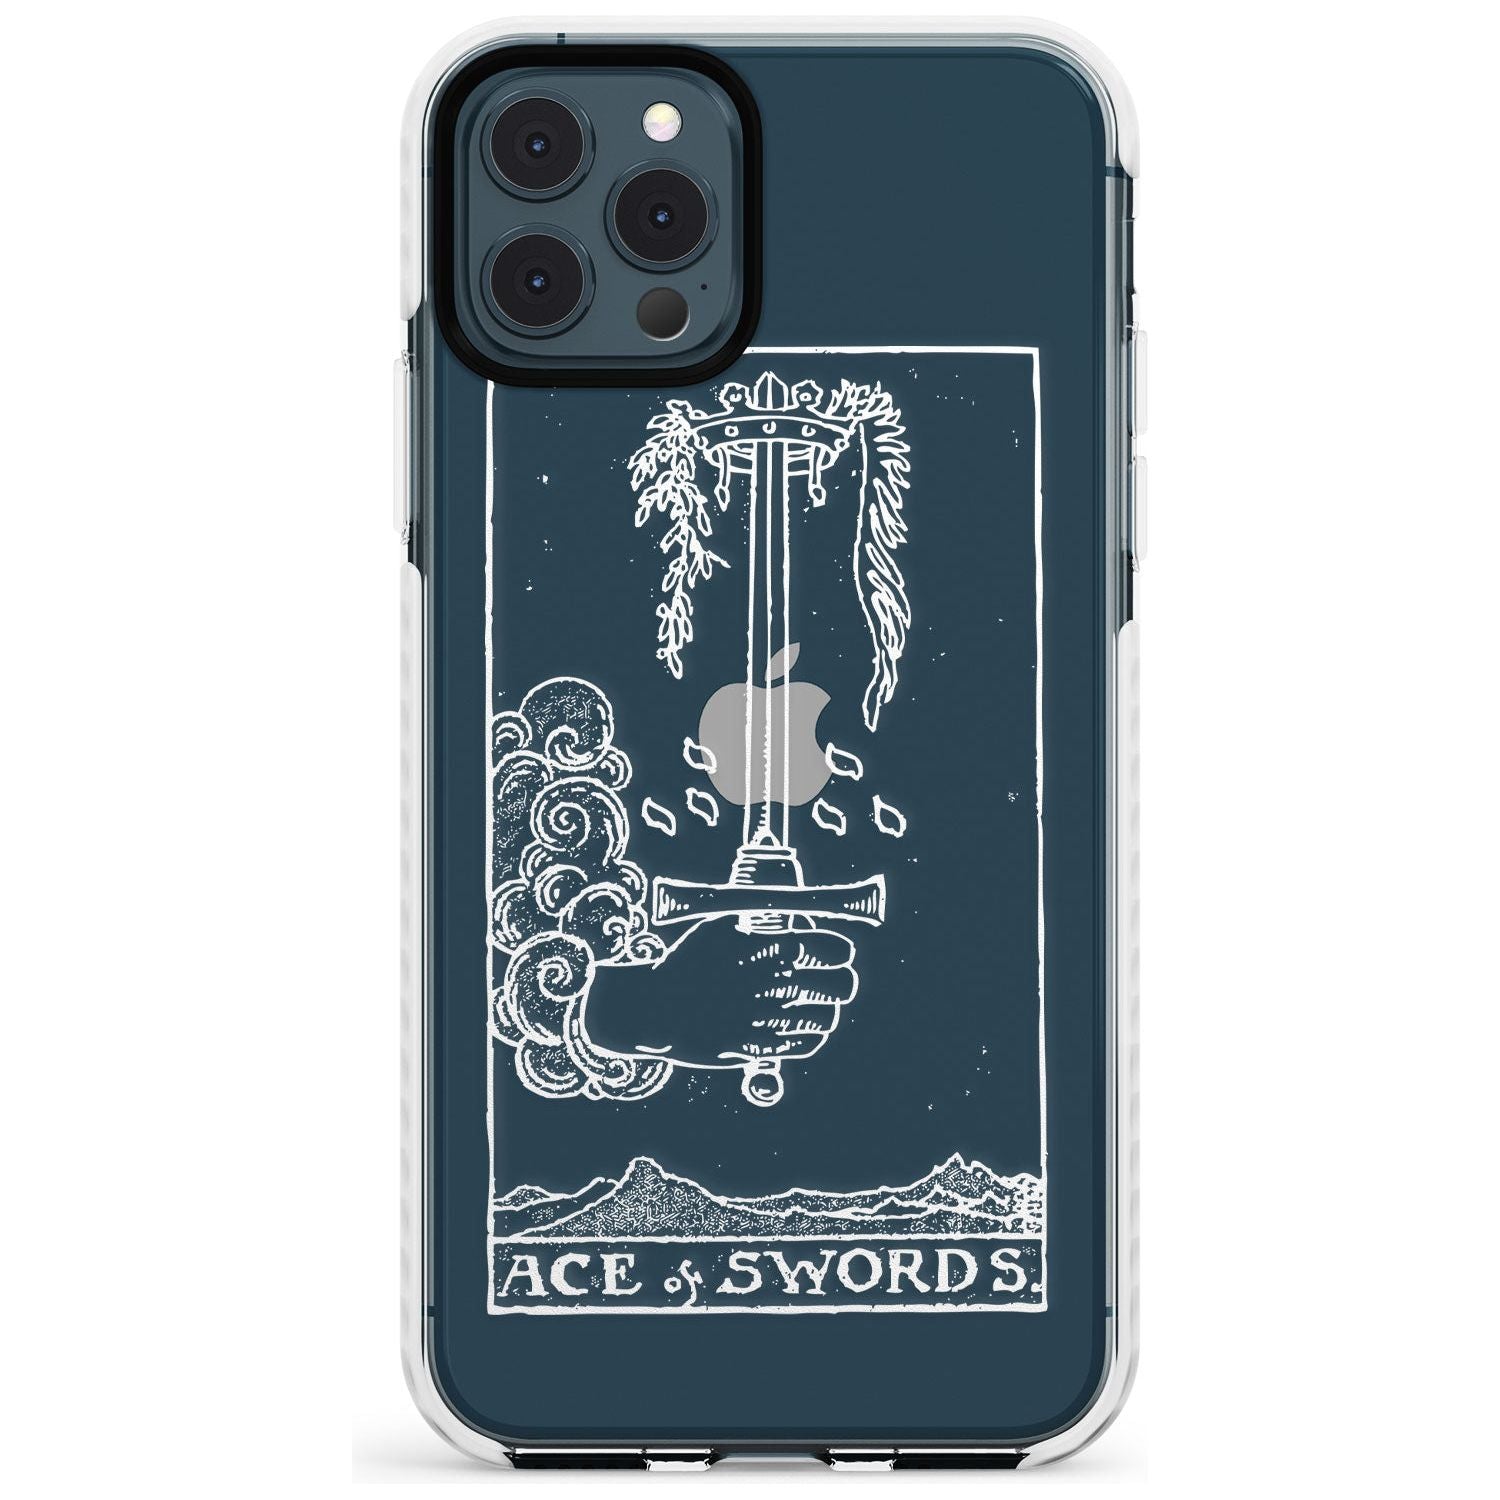 Ace of Swords Tarot Card - White Transparent Slim TPU Phone Case for iPhone 11 Pro Max